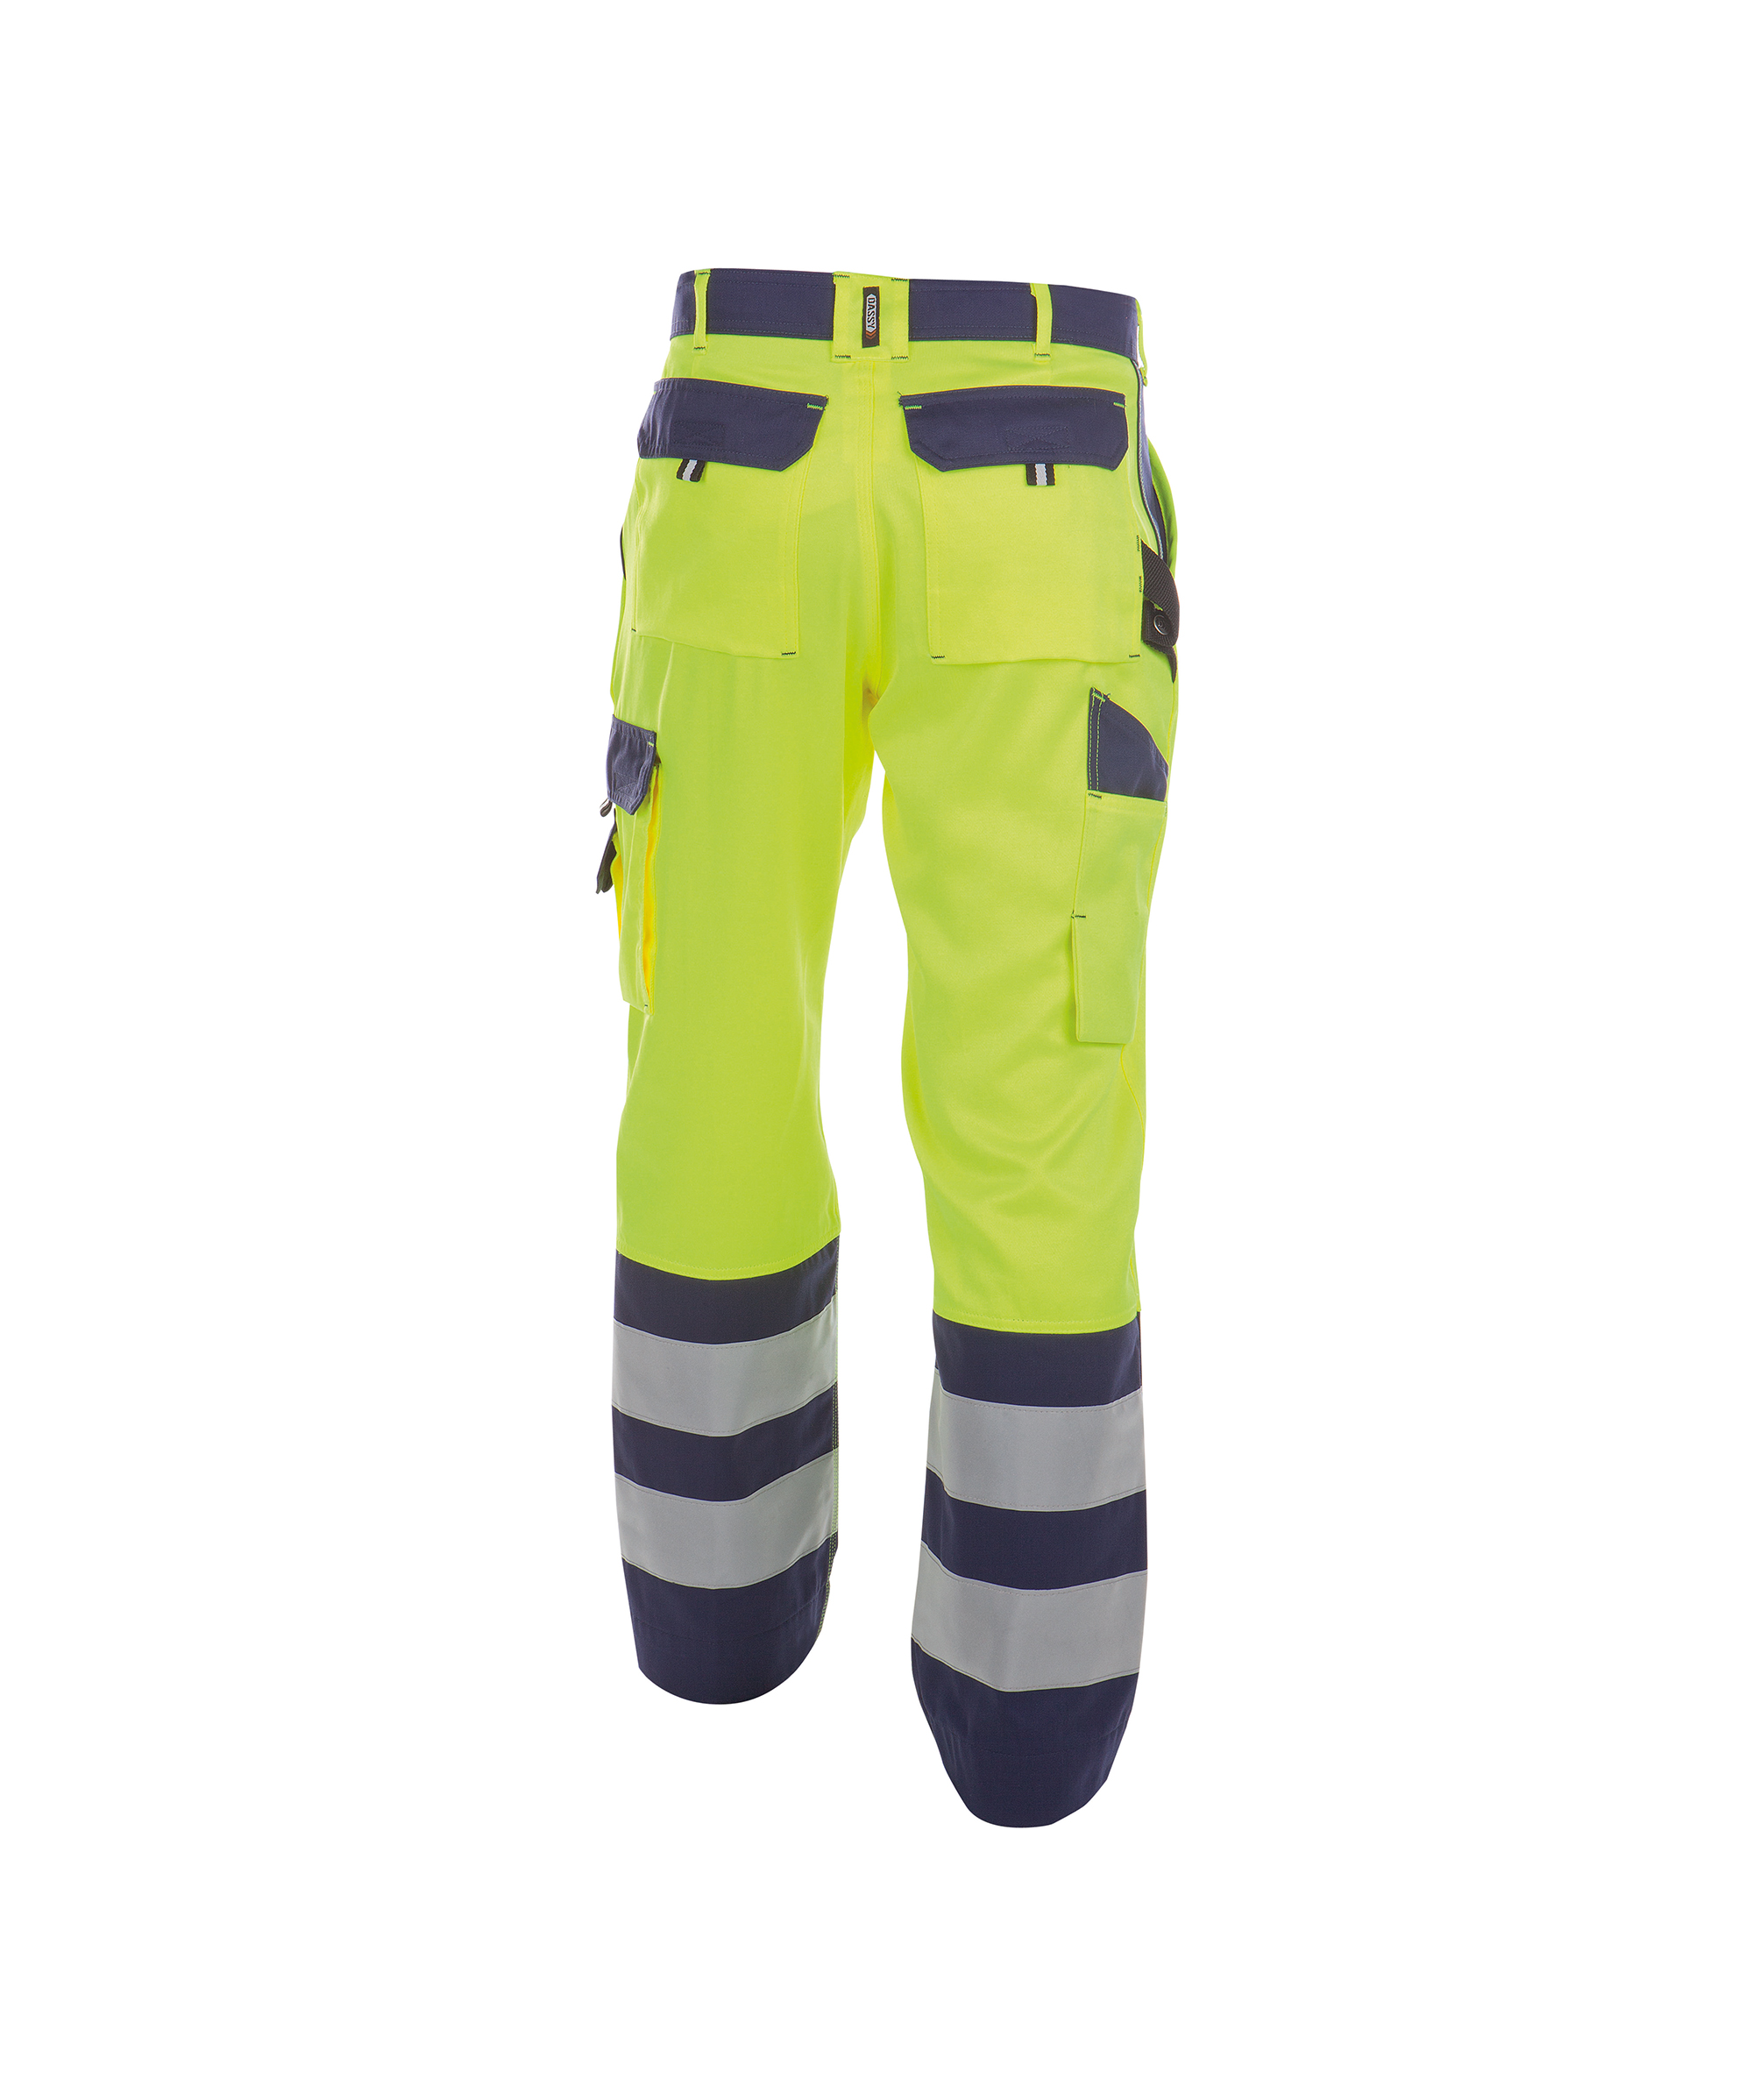 lancaster_high-visibility-work-trousers_fluo-yellow-navy_back.jpg